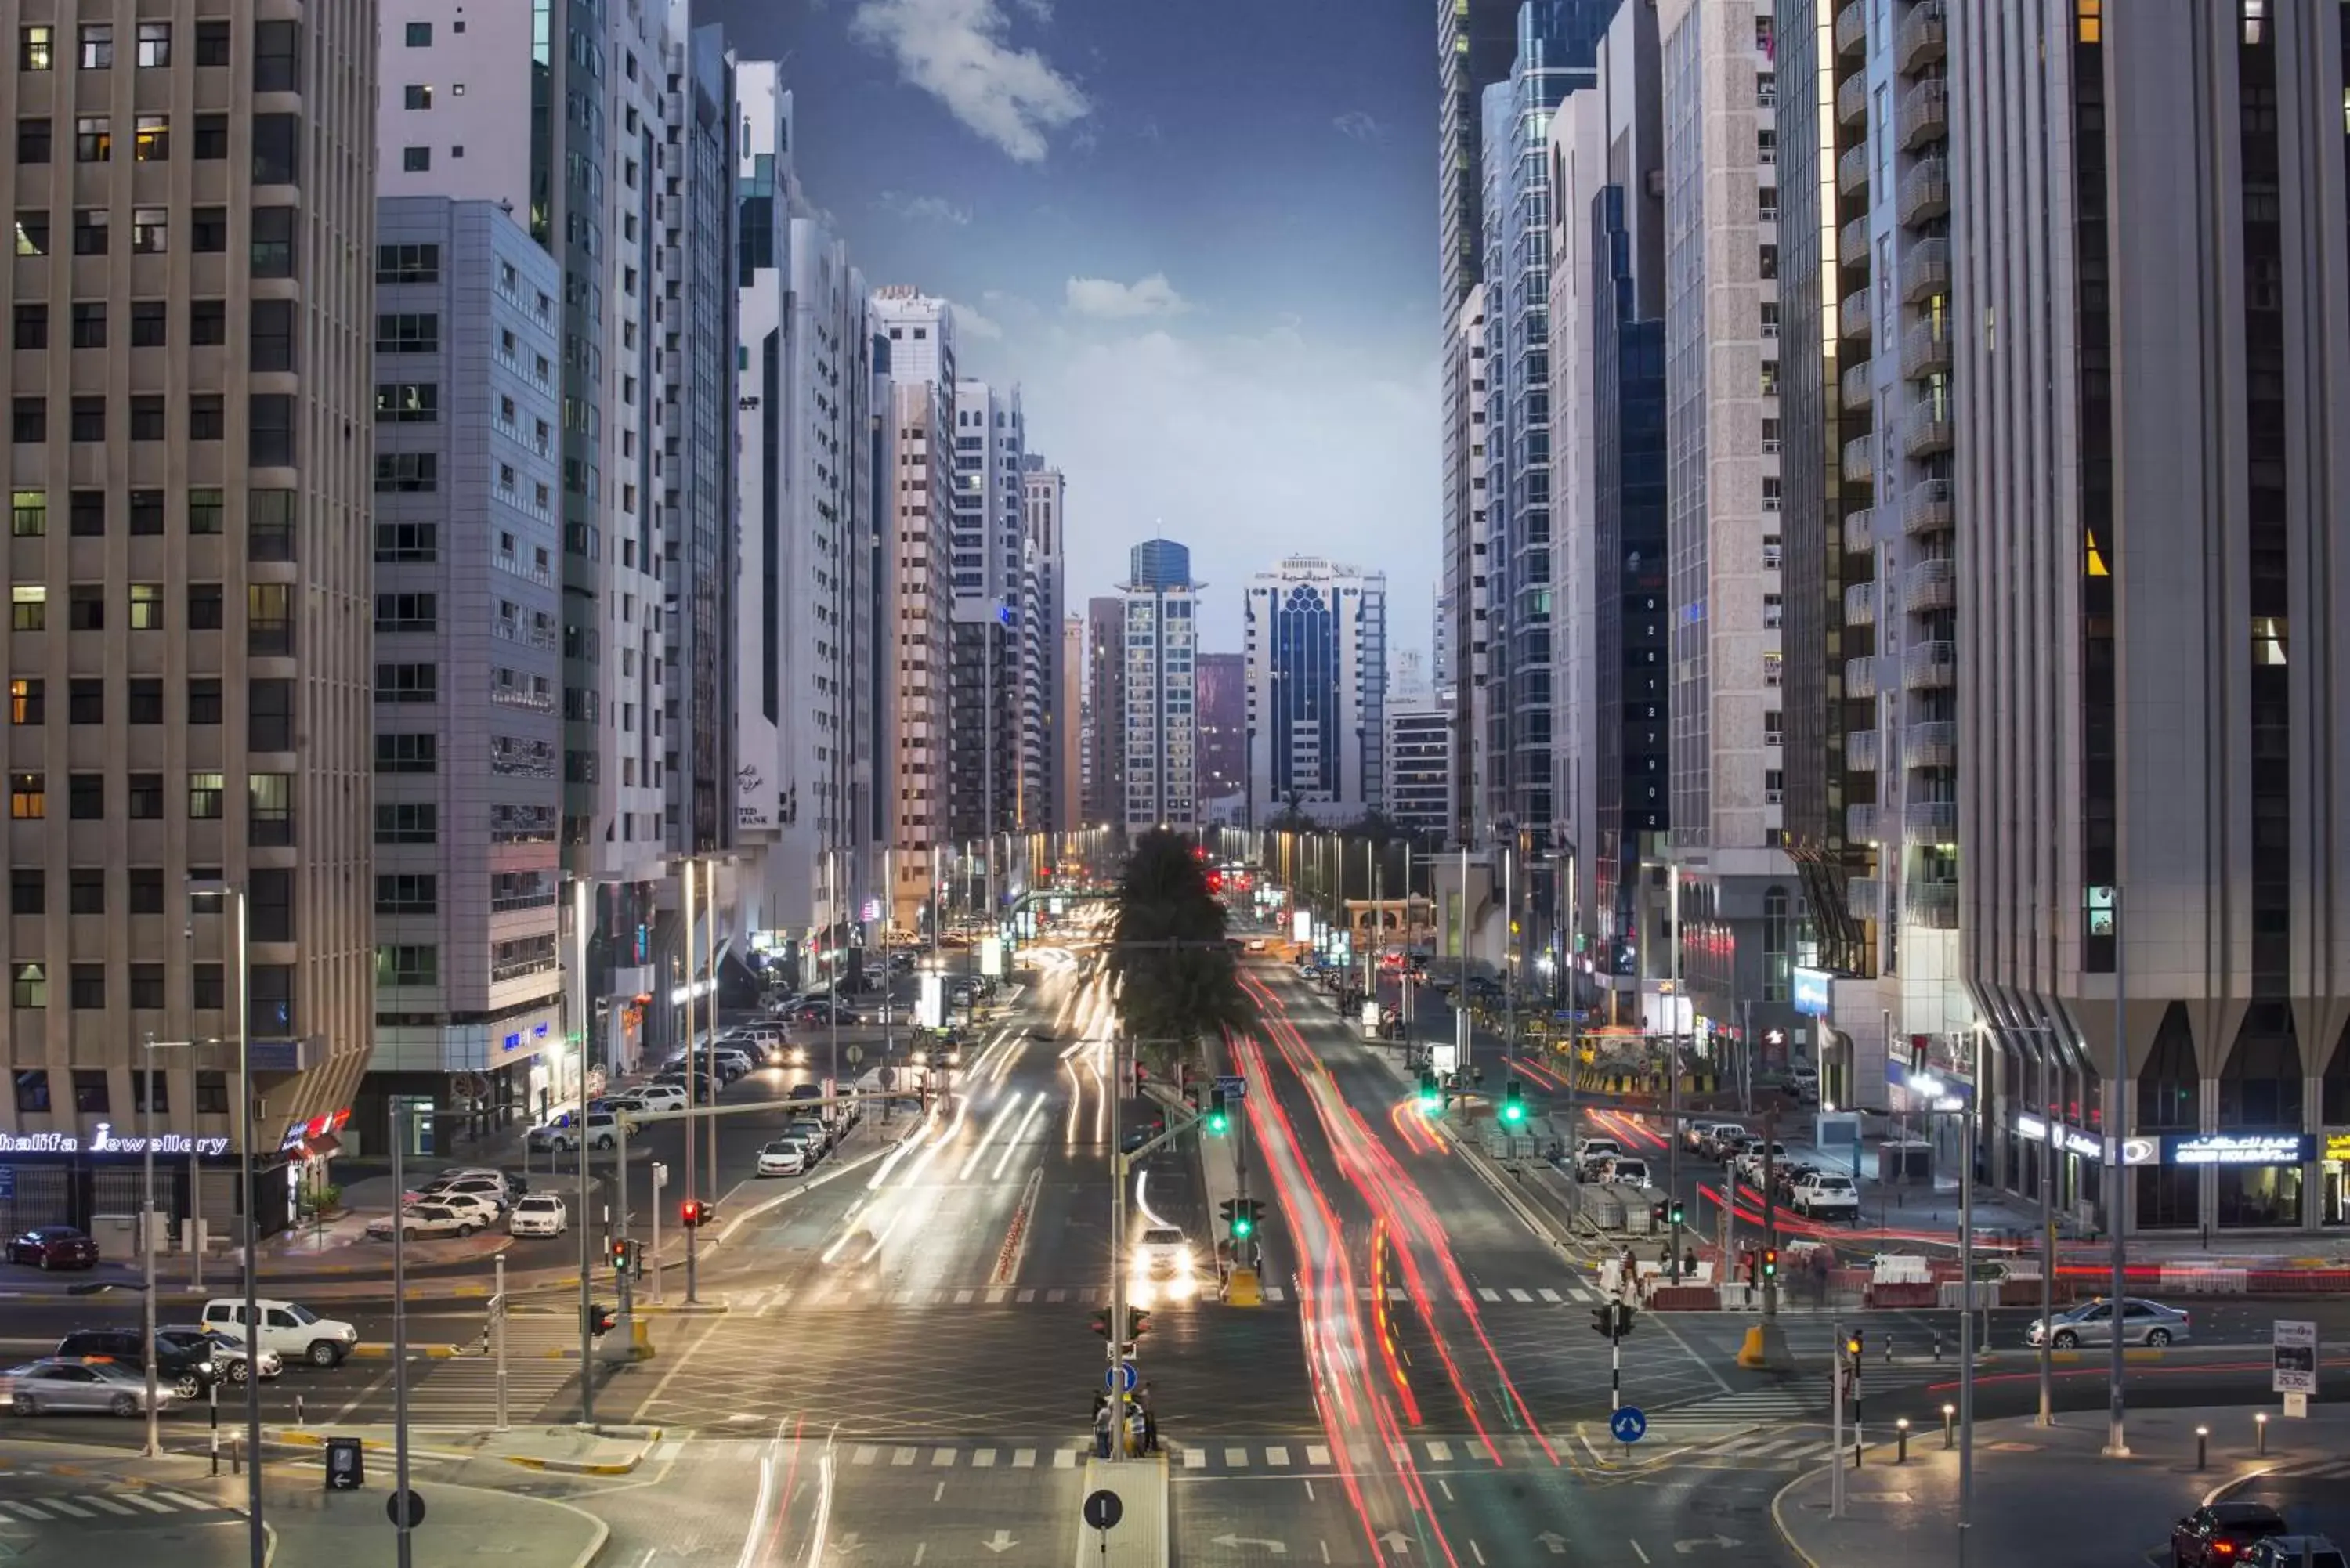 City View in TRYP by Wyndham Abu Dhabi City Center